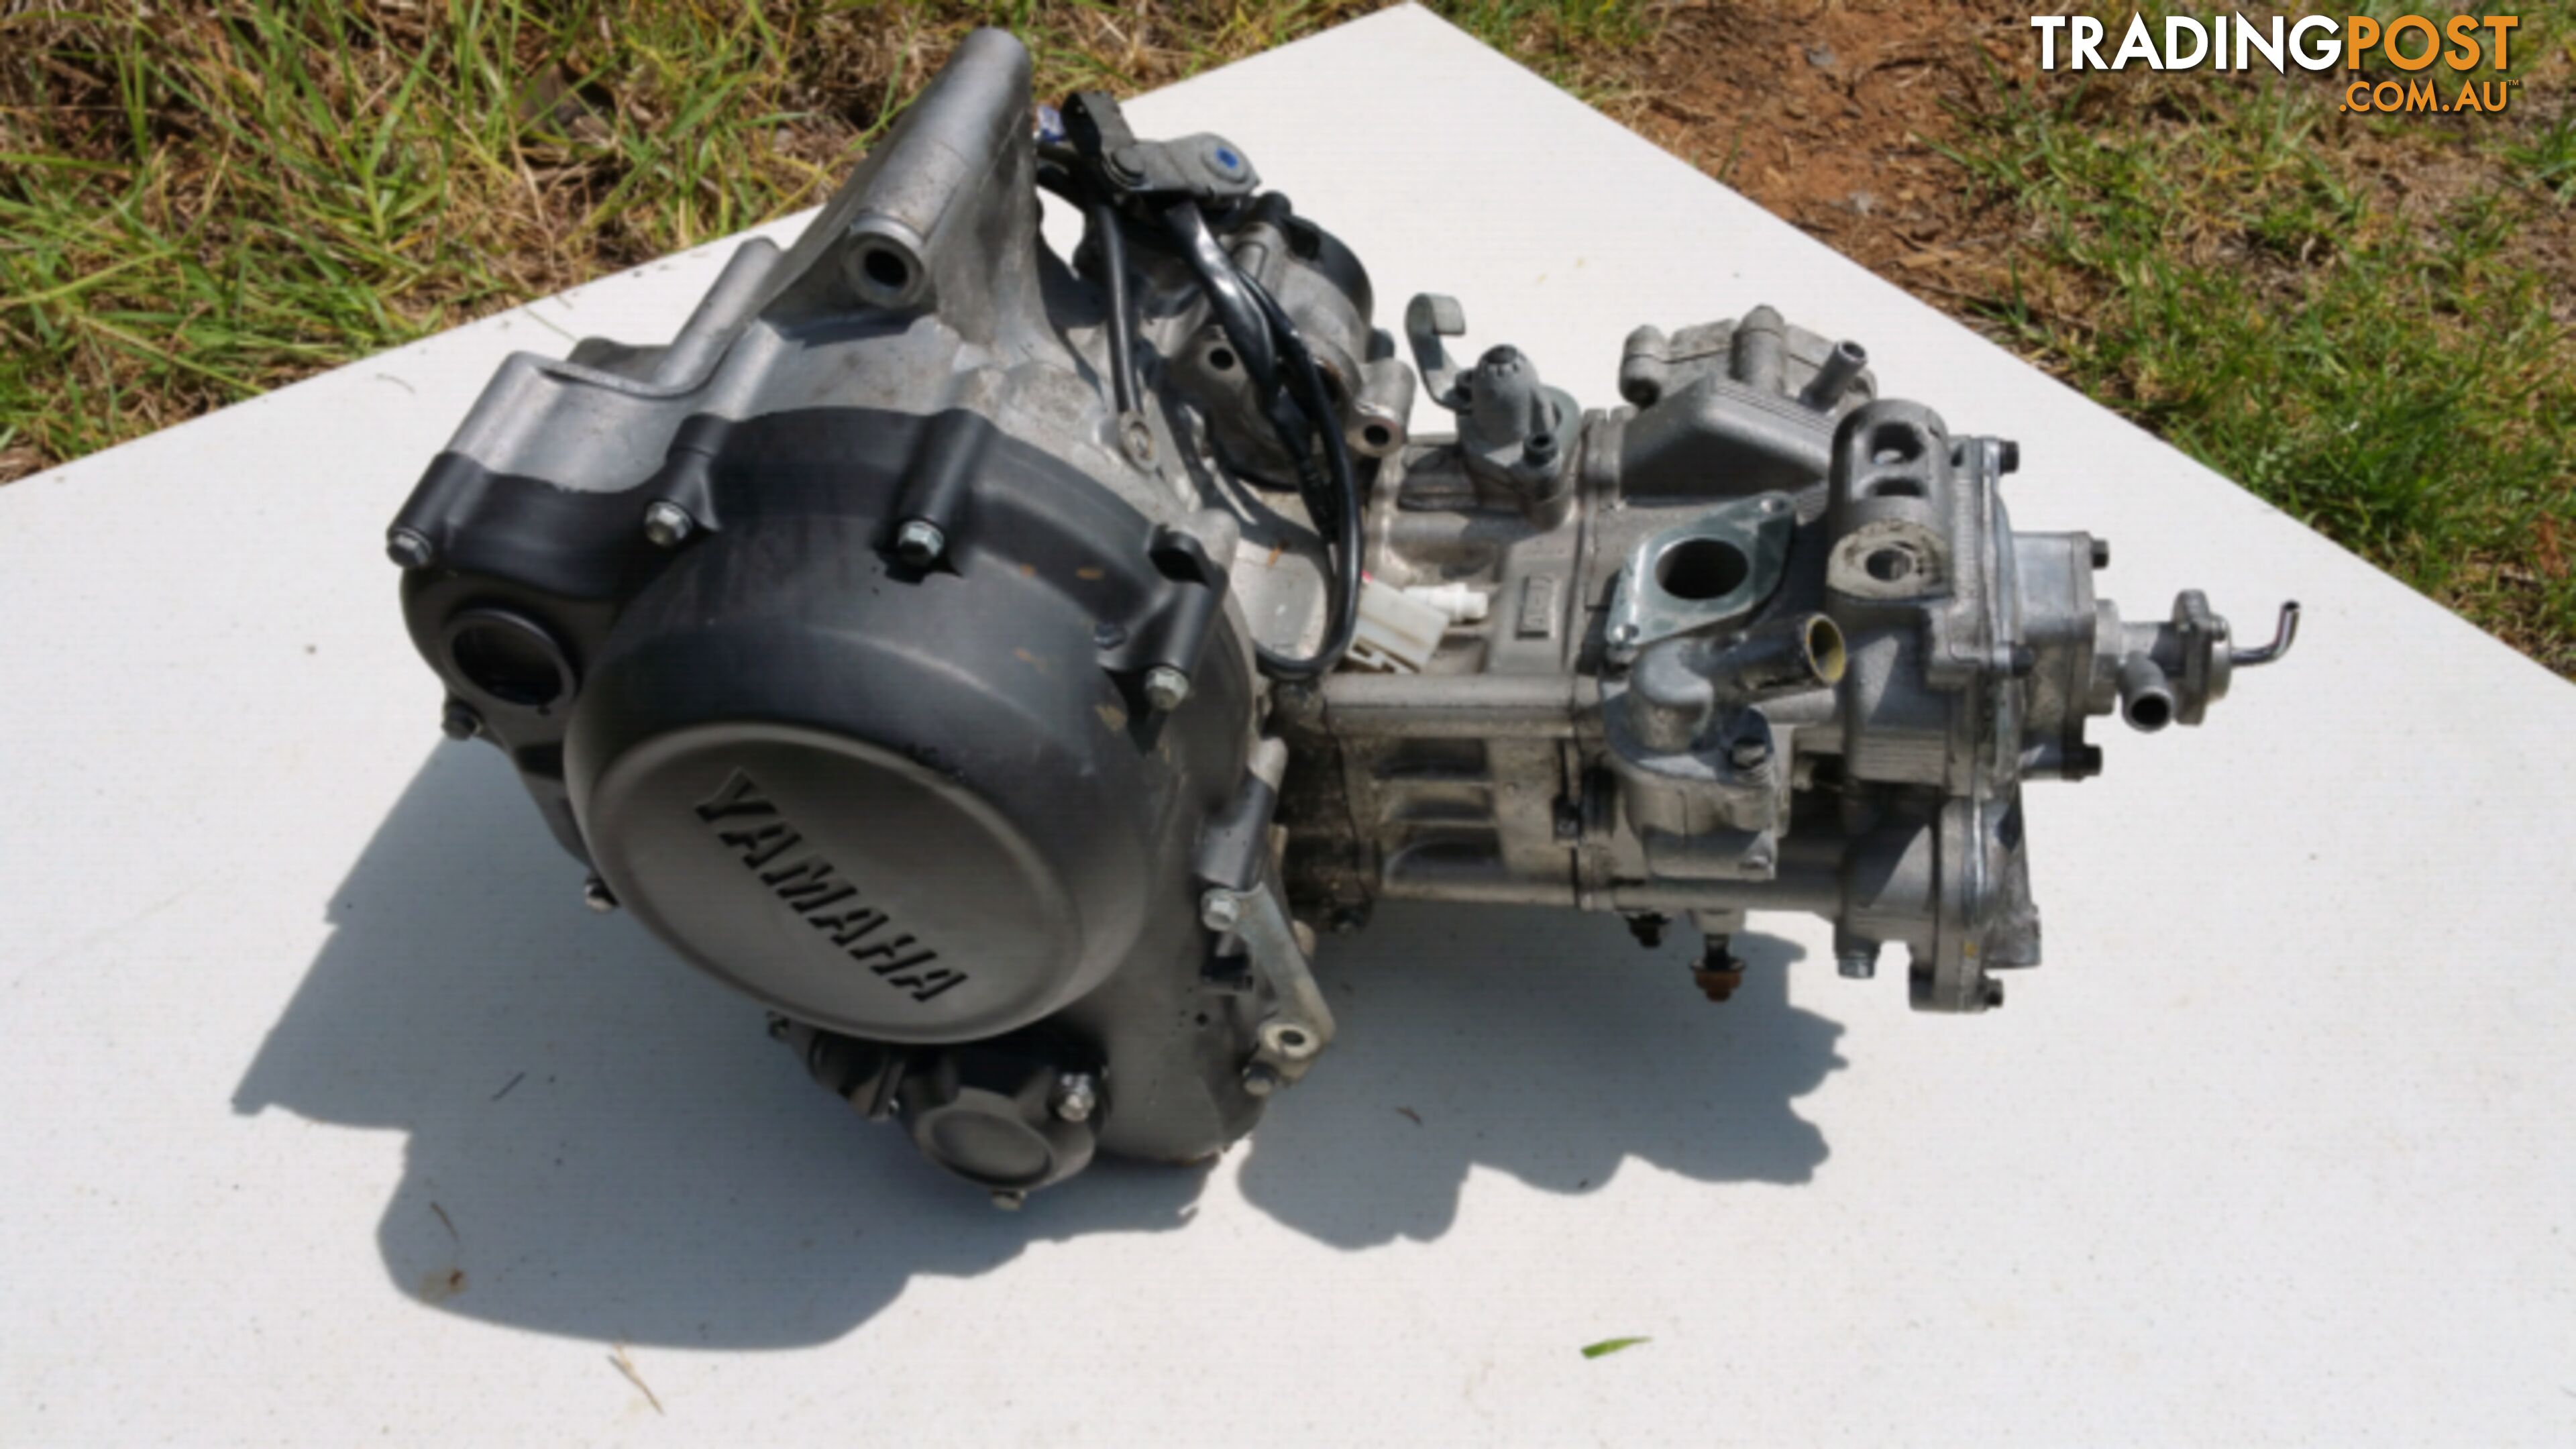 YAMAHA 150cc ENGINE YZFR15 YZF R15 MOTOR WITH GEARBOX COMPLETE